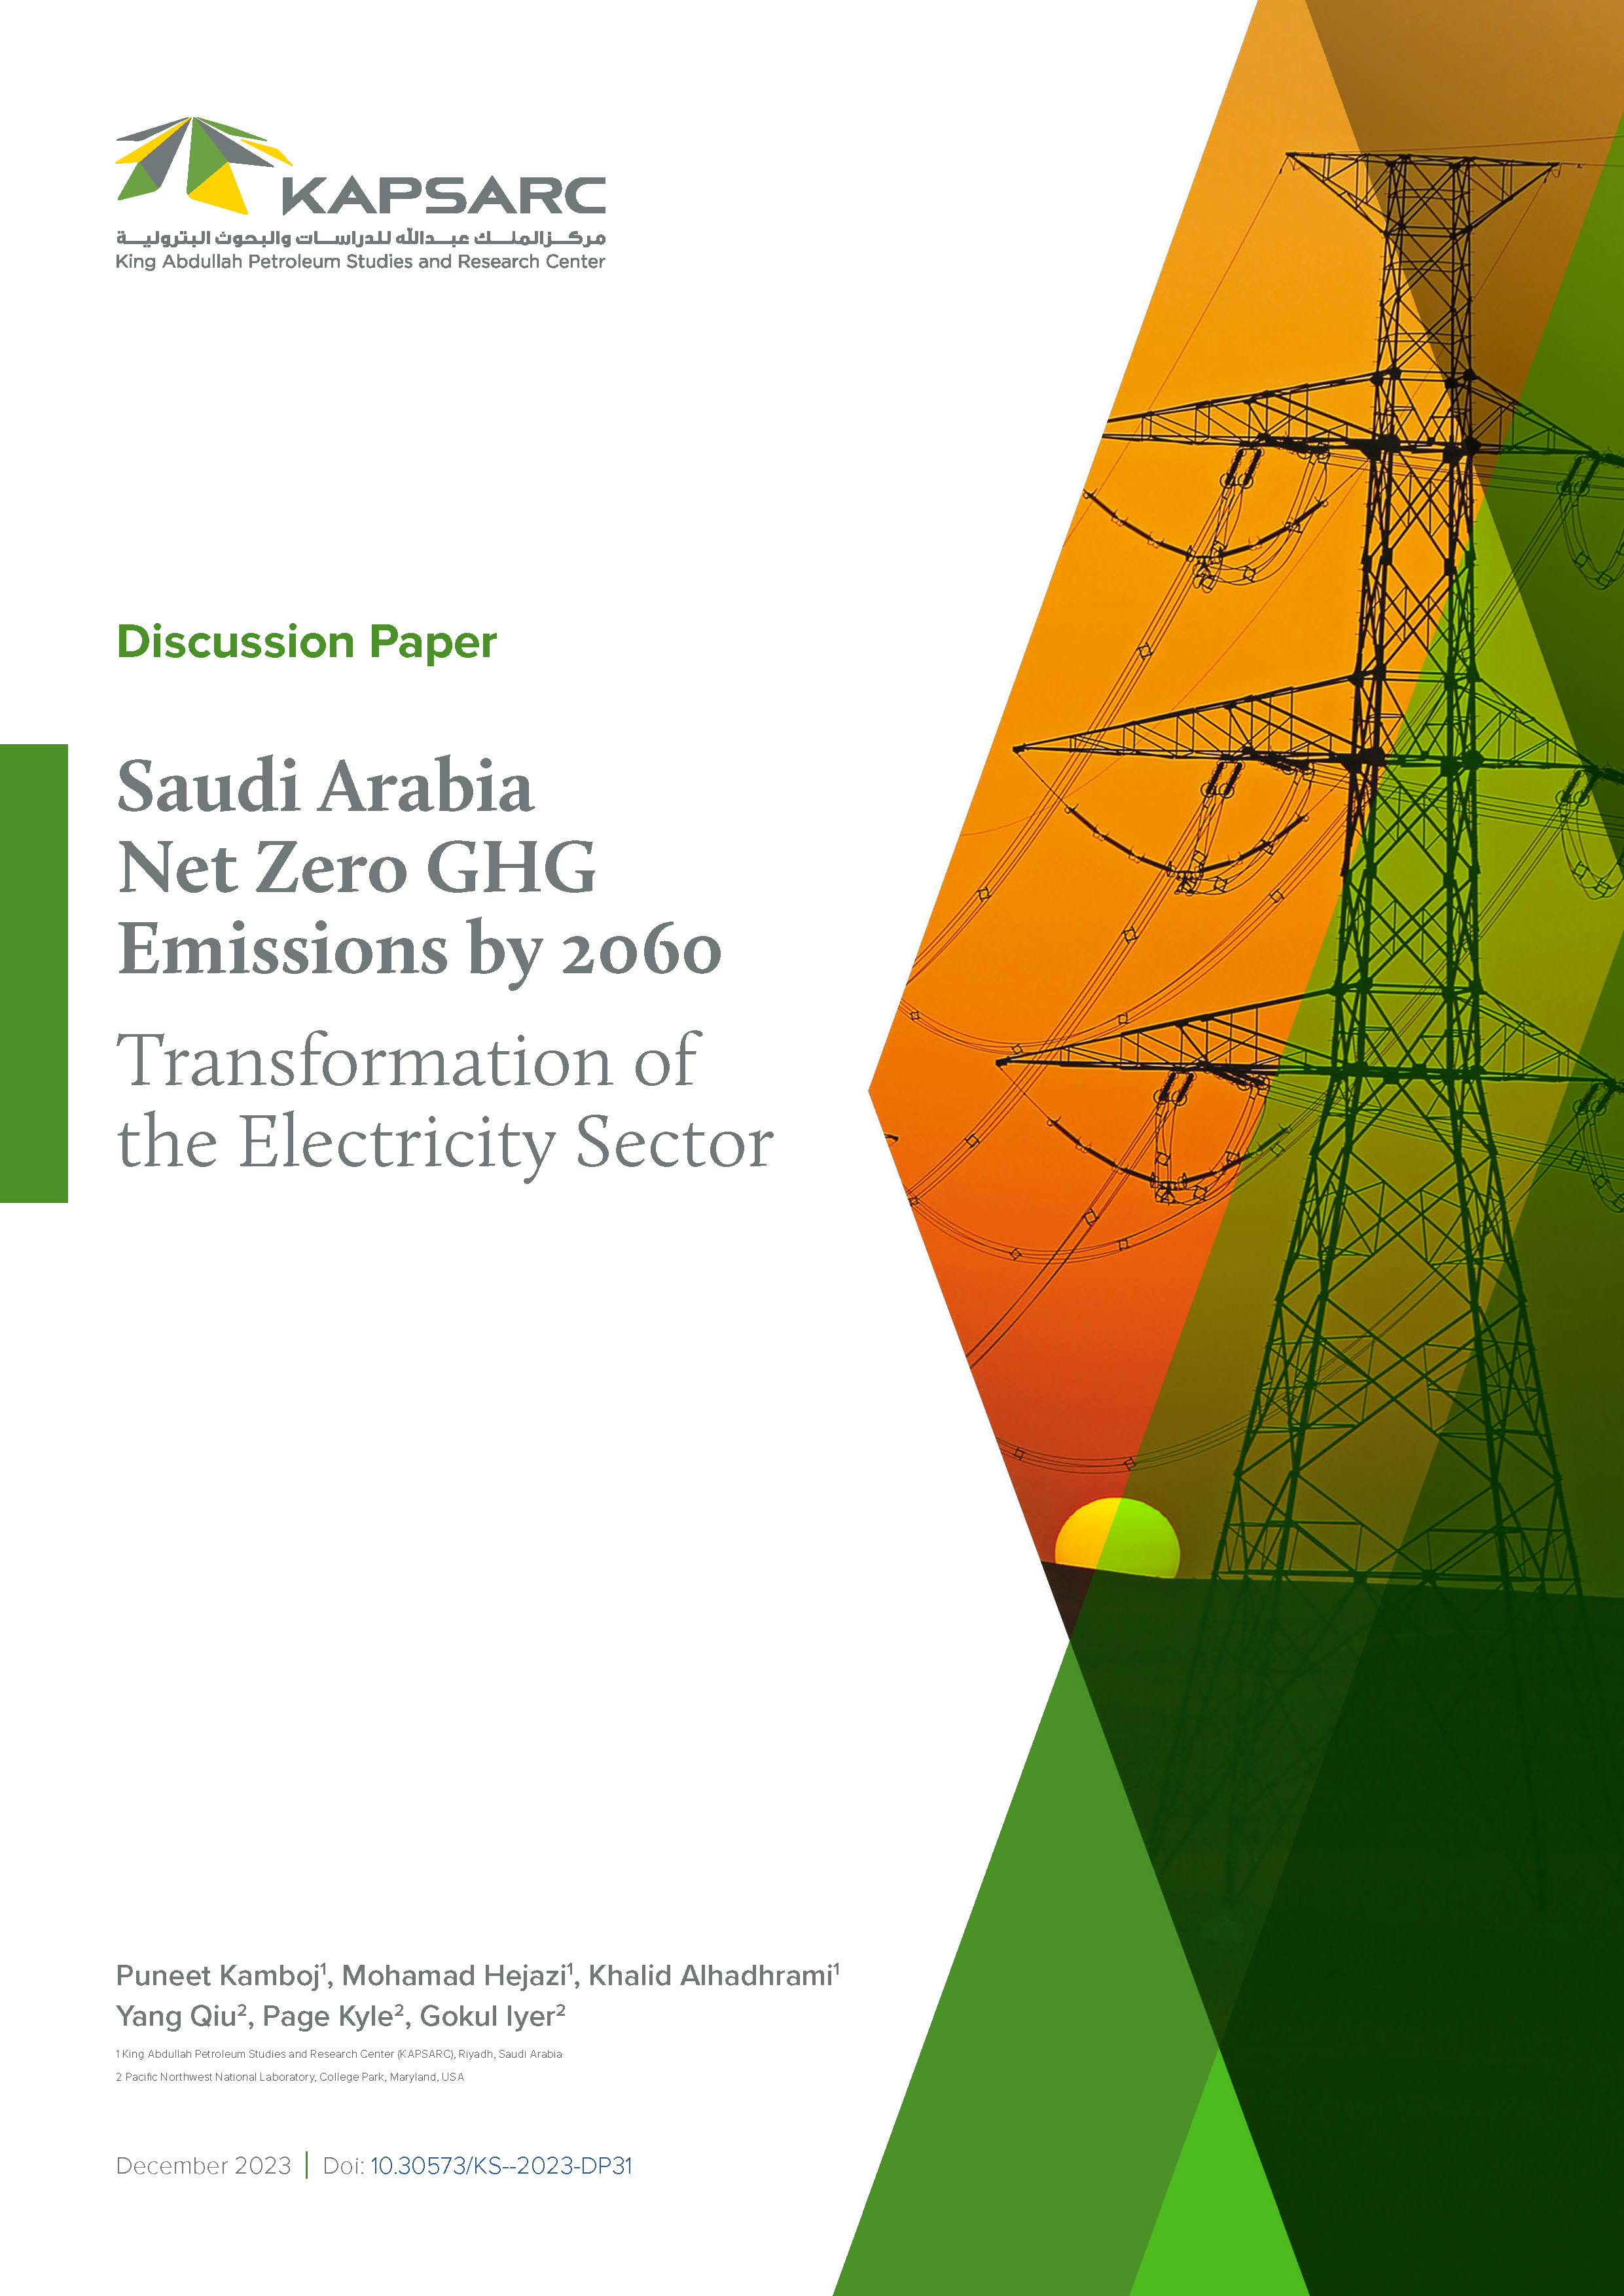 Saudi Arabia Net Zero GHG Emissions by 2060: Transformation of the Electricity Sector